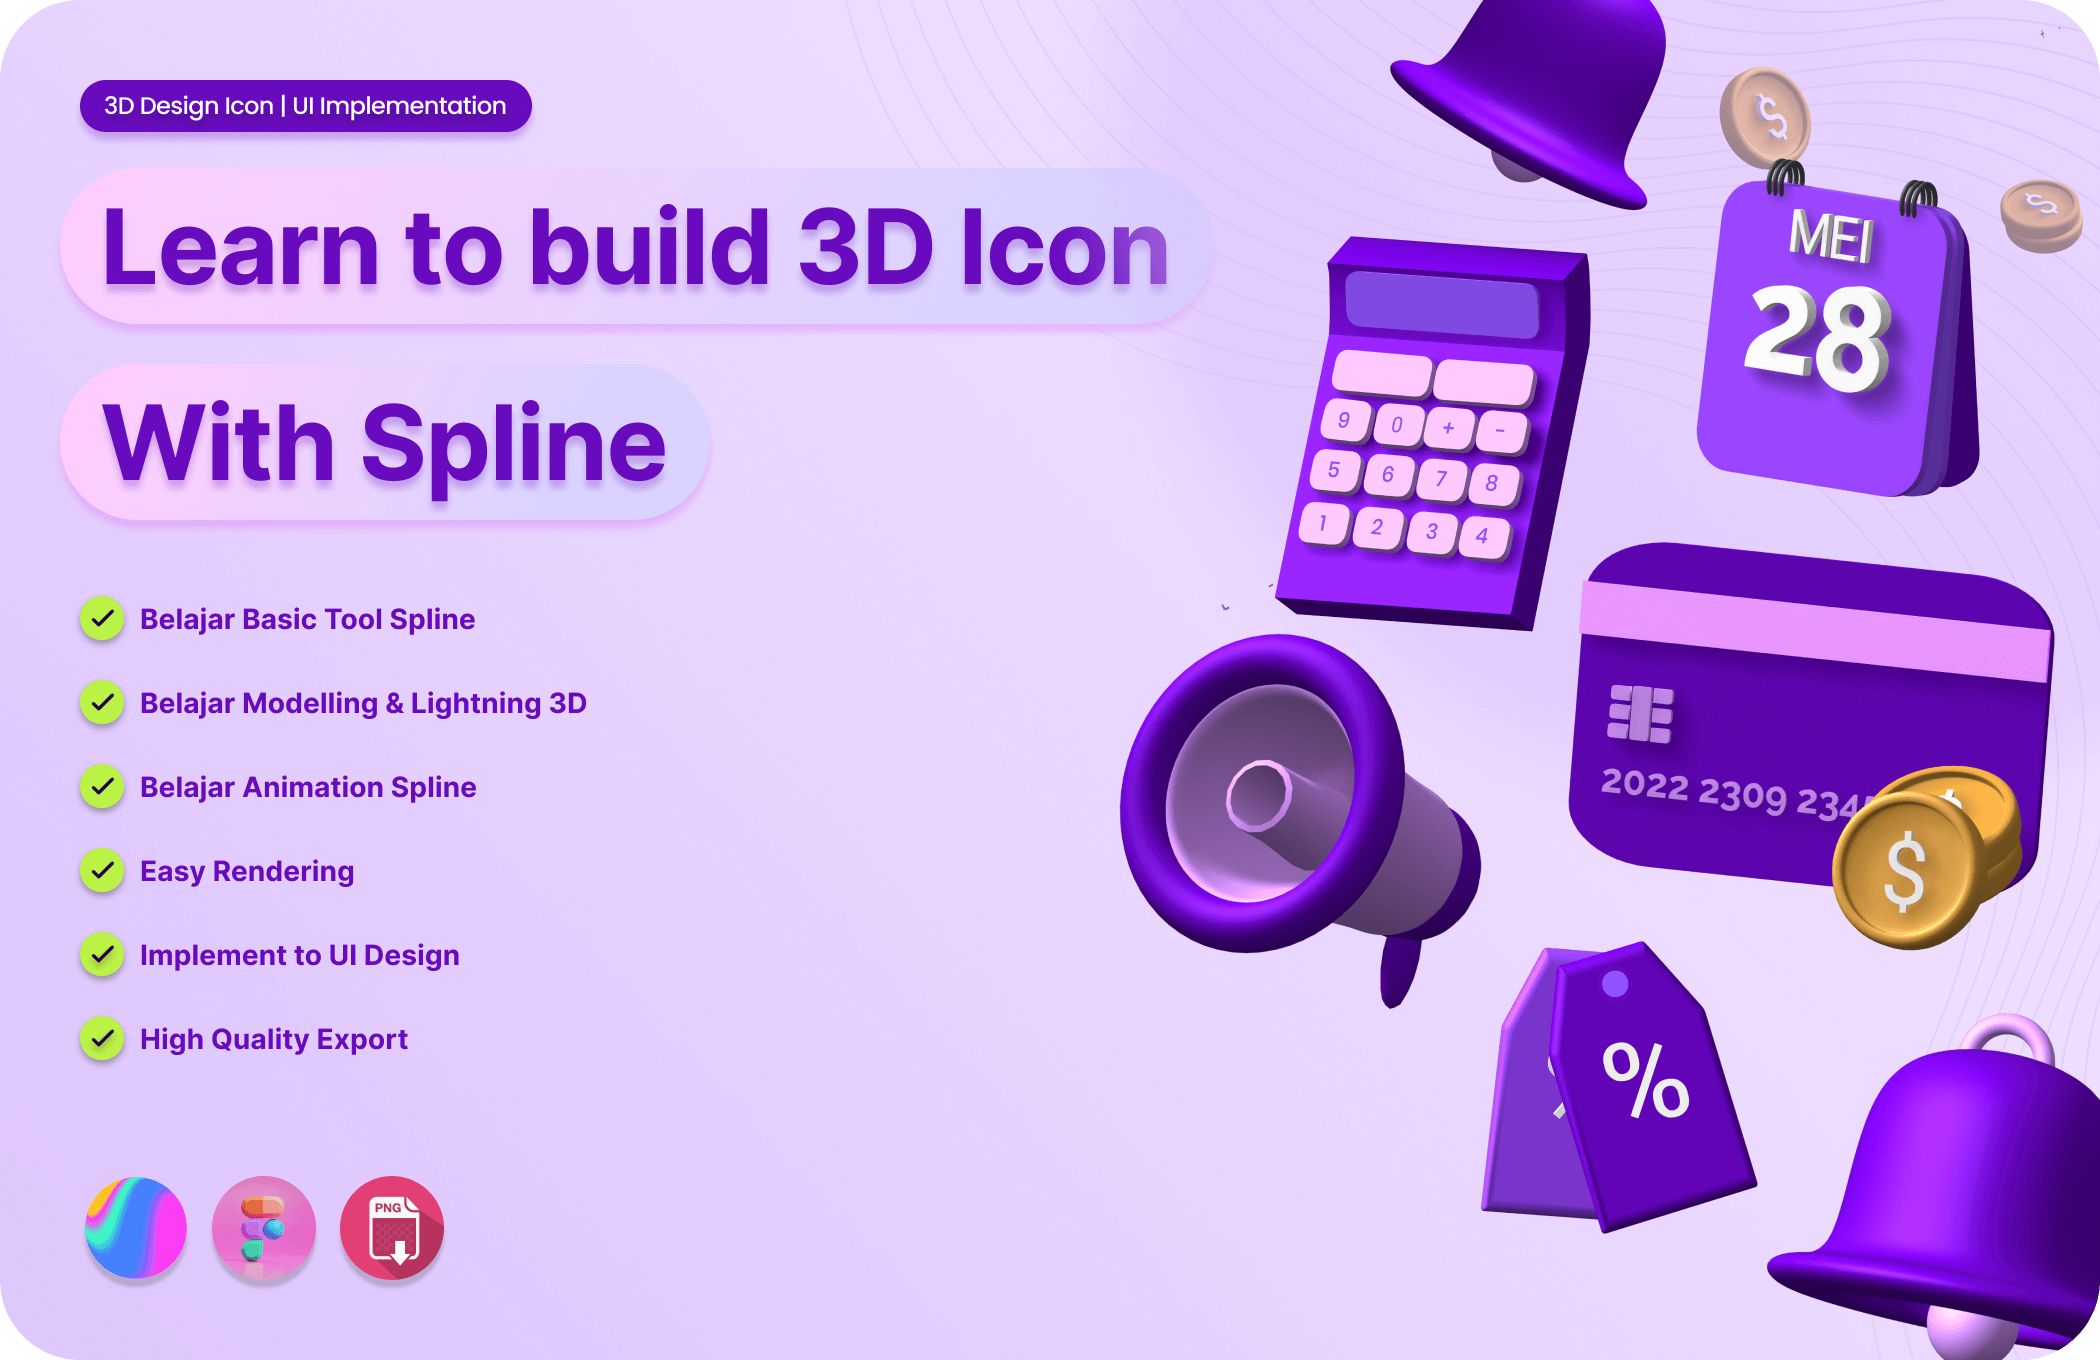 Kelas Learn to build a 3D Icon with Spline for UI Implementation di BuildWith Angga